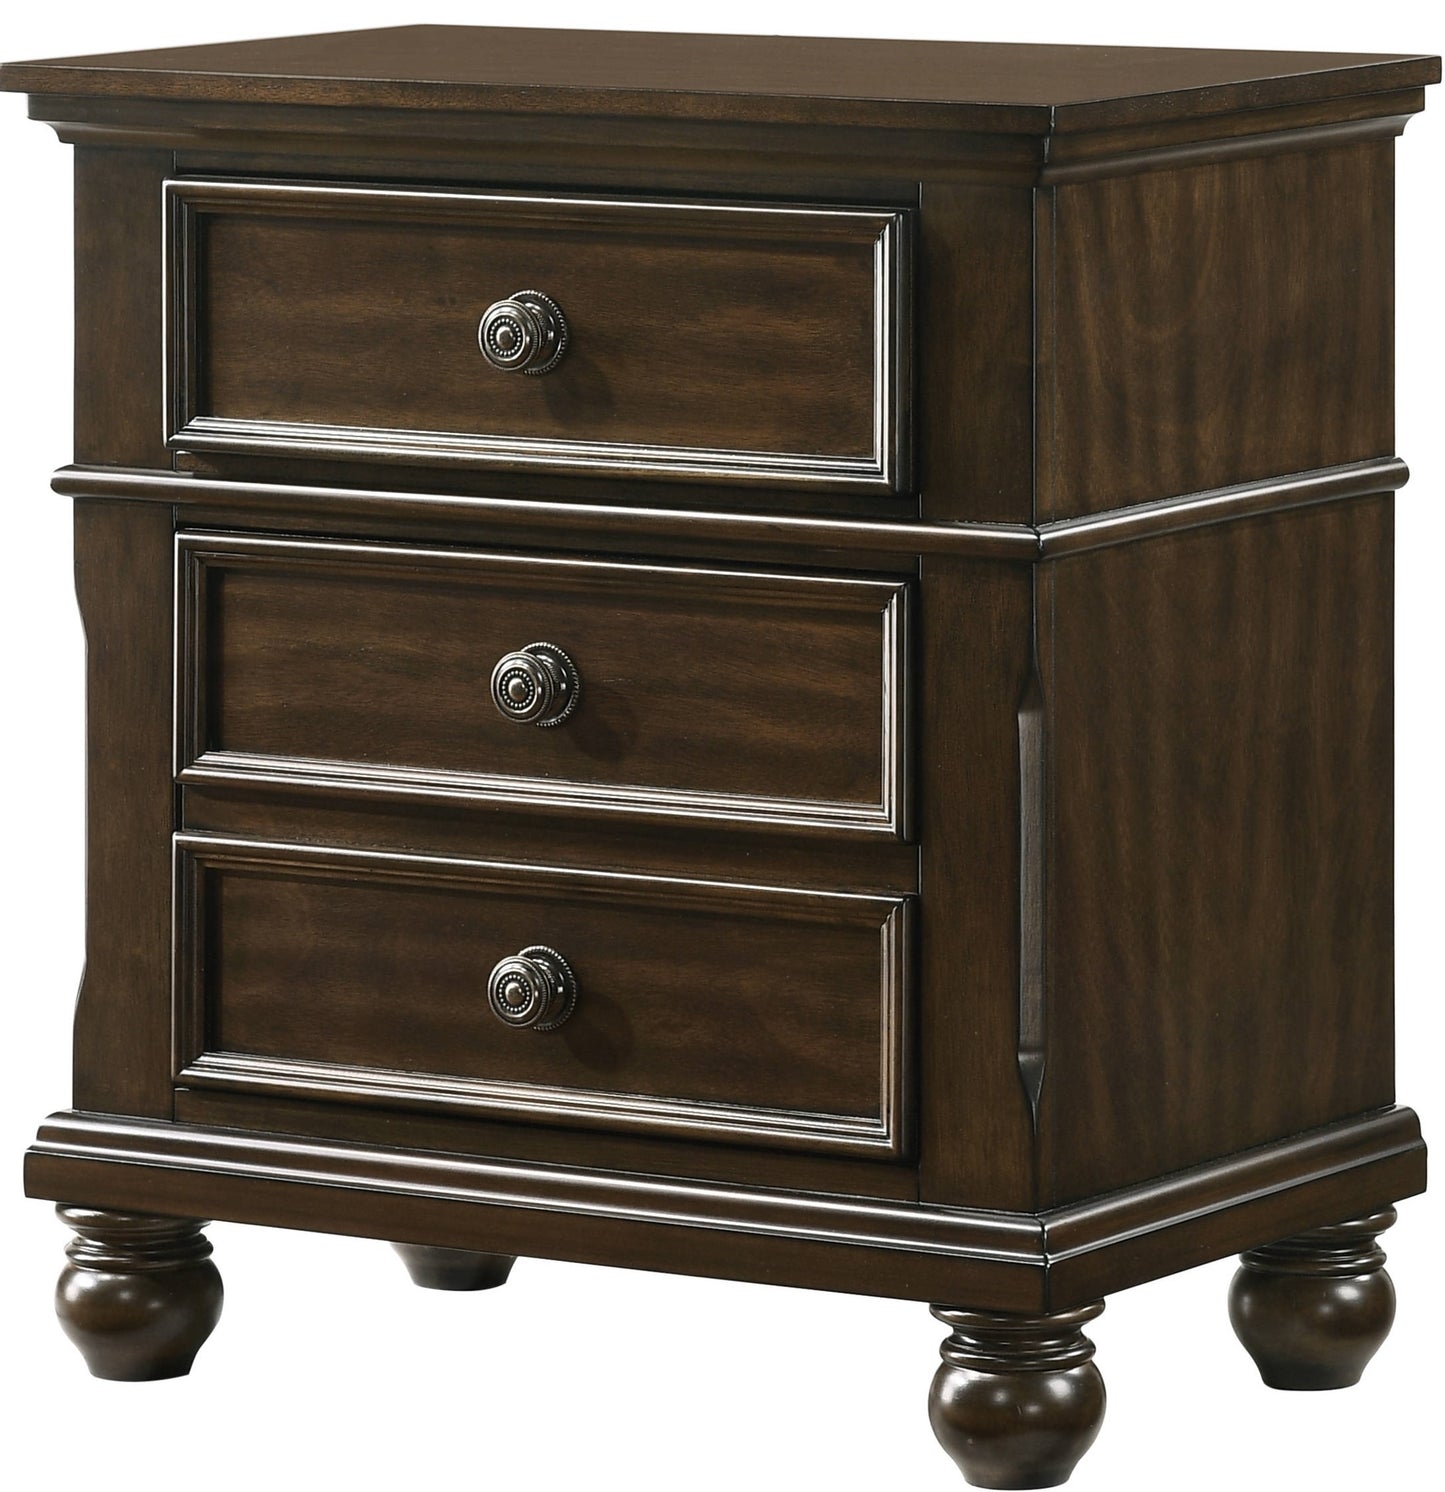 Traditional 3-Drawer Nightstand with Bun Feet 1-Pc End Table Brown Wood Veneers & Solids Furniture